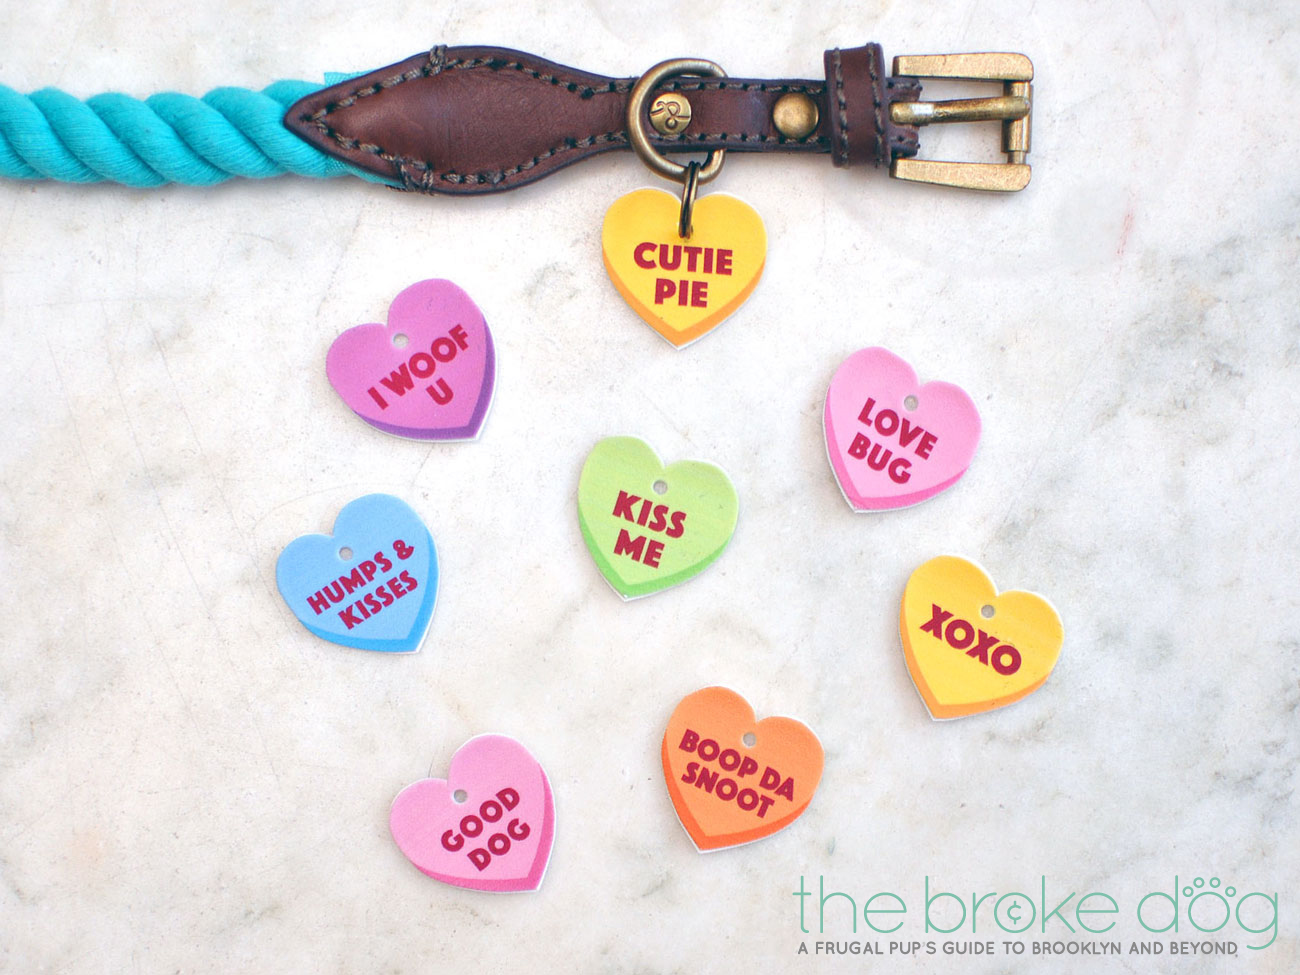 It's almost Valentine's Day, and we all know where your love REALLY lies! With only a few materials, you can make your pup a token of your affection that will also look adorable on his or her collar. Check out these easy Free Printable Conversation Heart Collar Charms for the perfect gift!